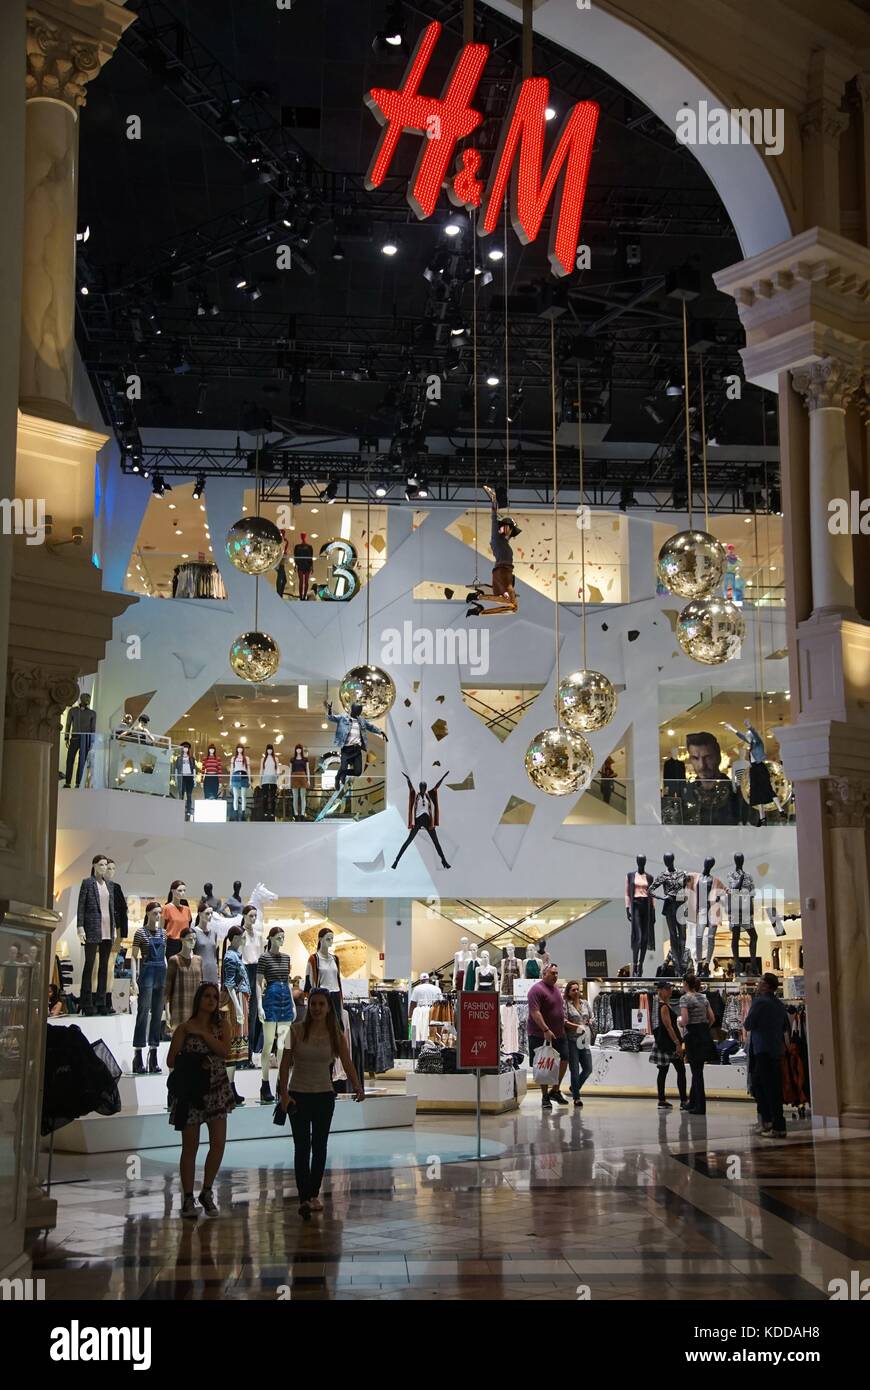 A luxury store of the brand " Hennes & Mauritz" (H&M) in the shopping male  of the Hotel Ceasare Palace in Las Vegas (21 February 2016). Shopping malls  are part of the